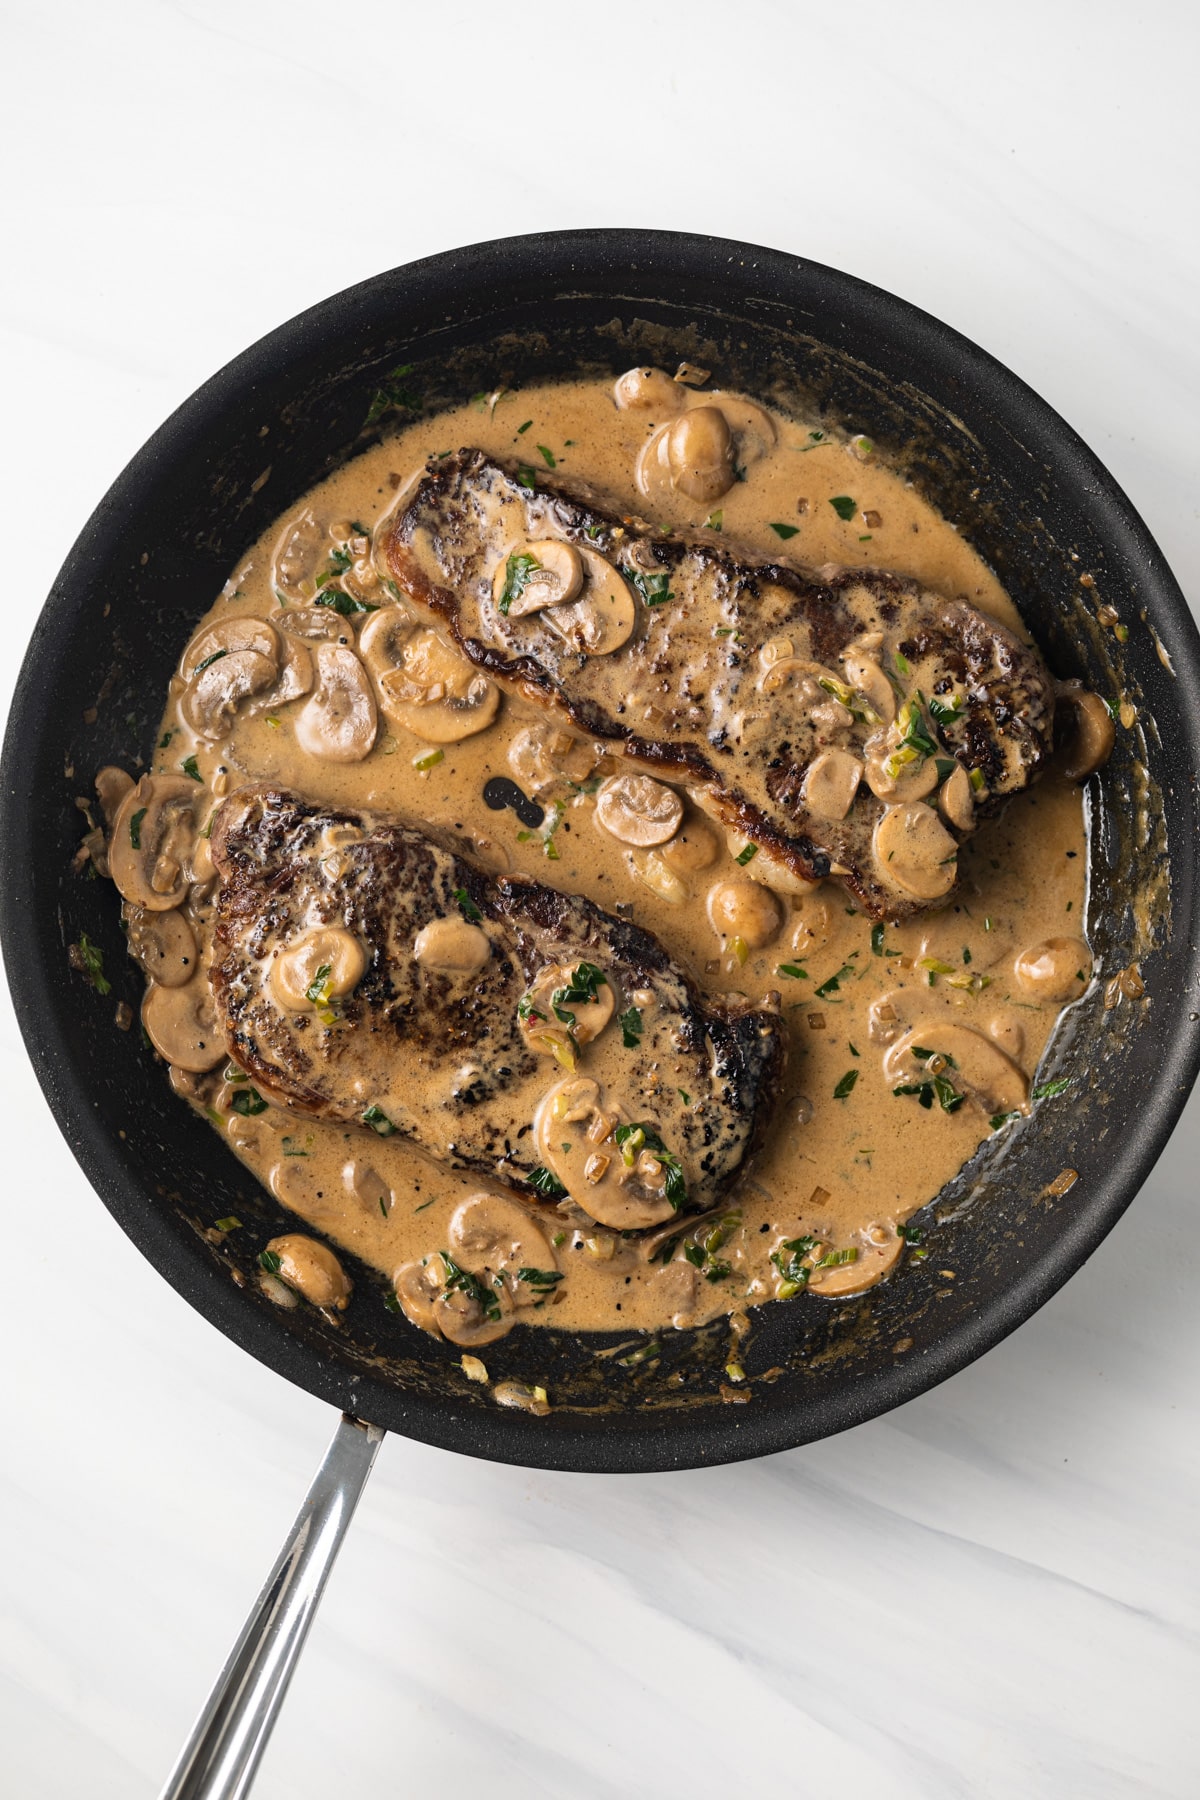 Steak with diane sauce in a skillet.